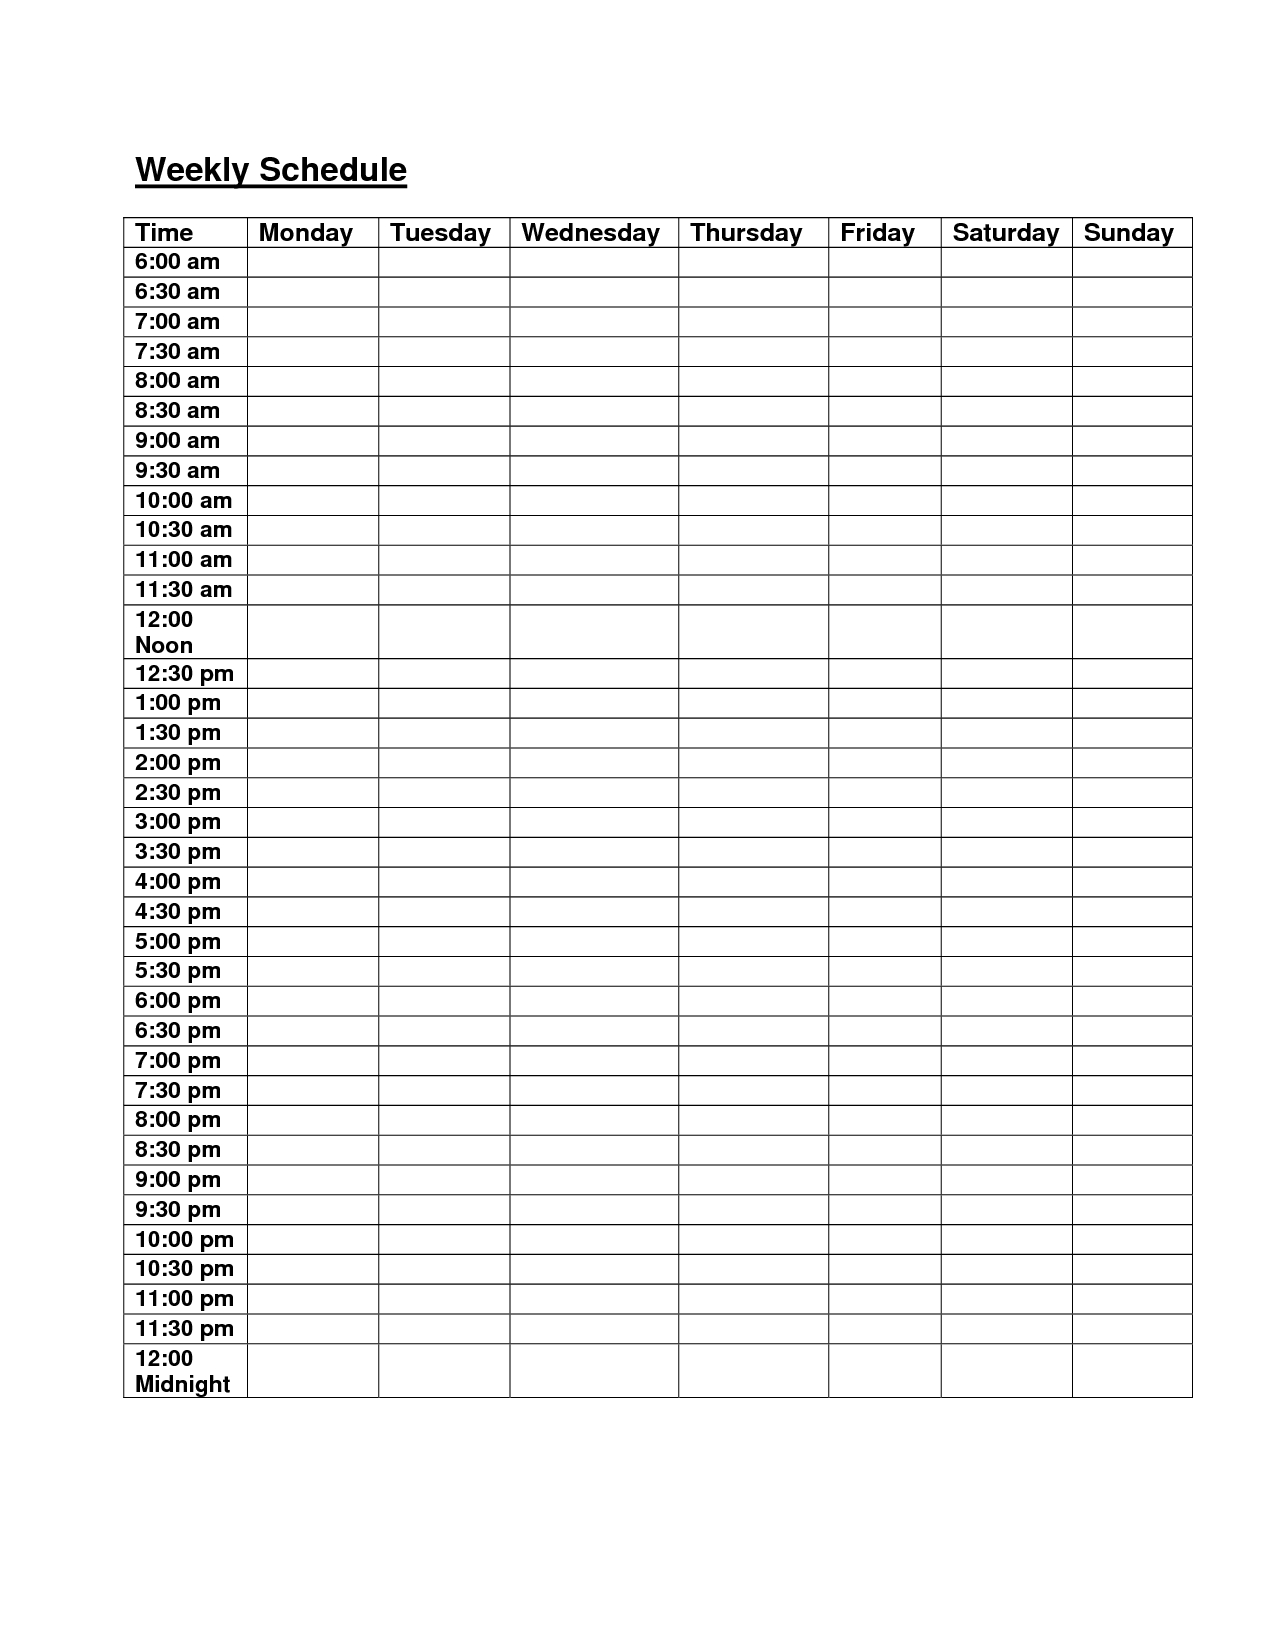 Weekly Schedule Template Monday Friday Qkgmvrjv | Printables-Monday-Friday Blank Weekly Schedule